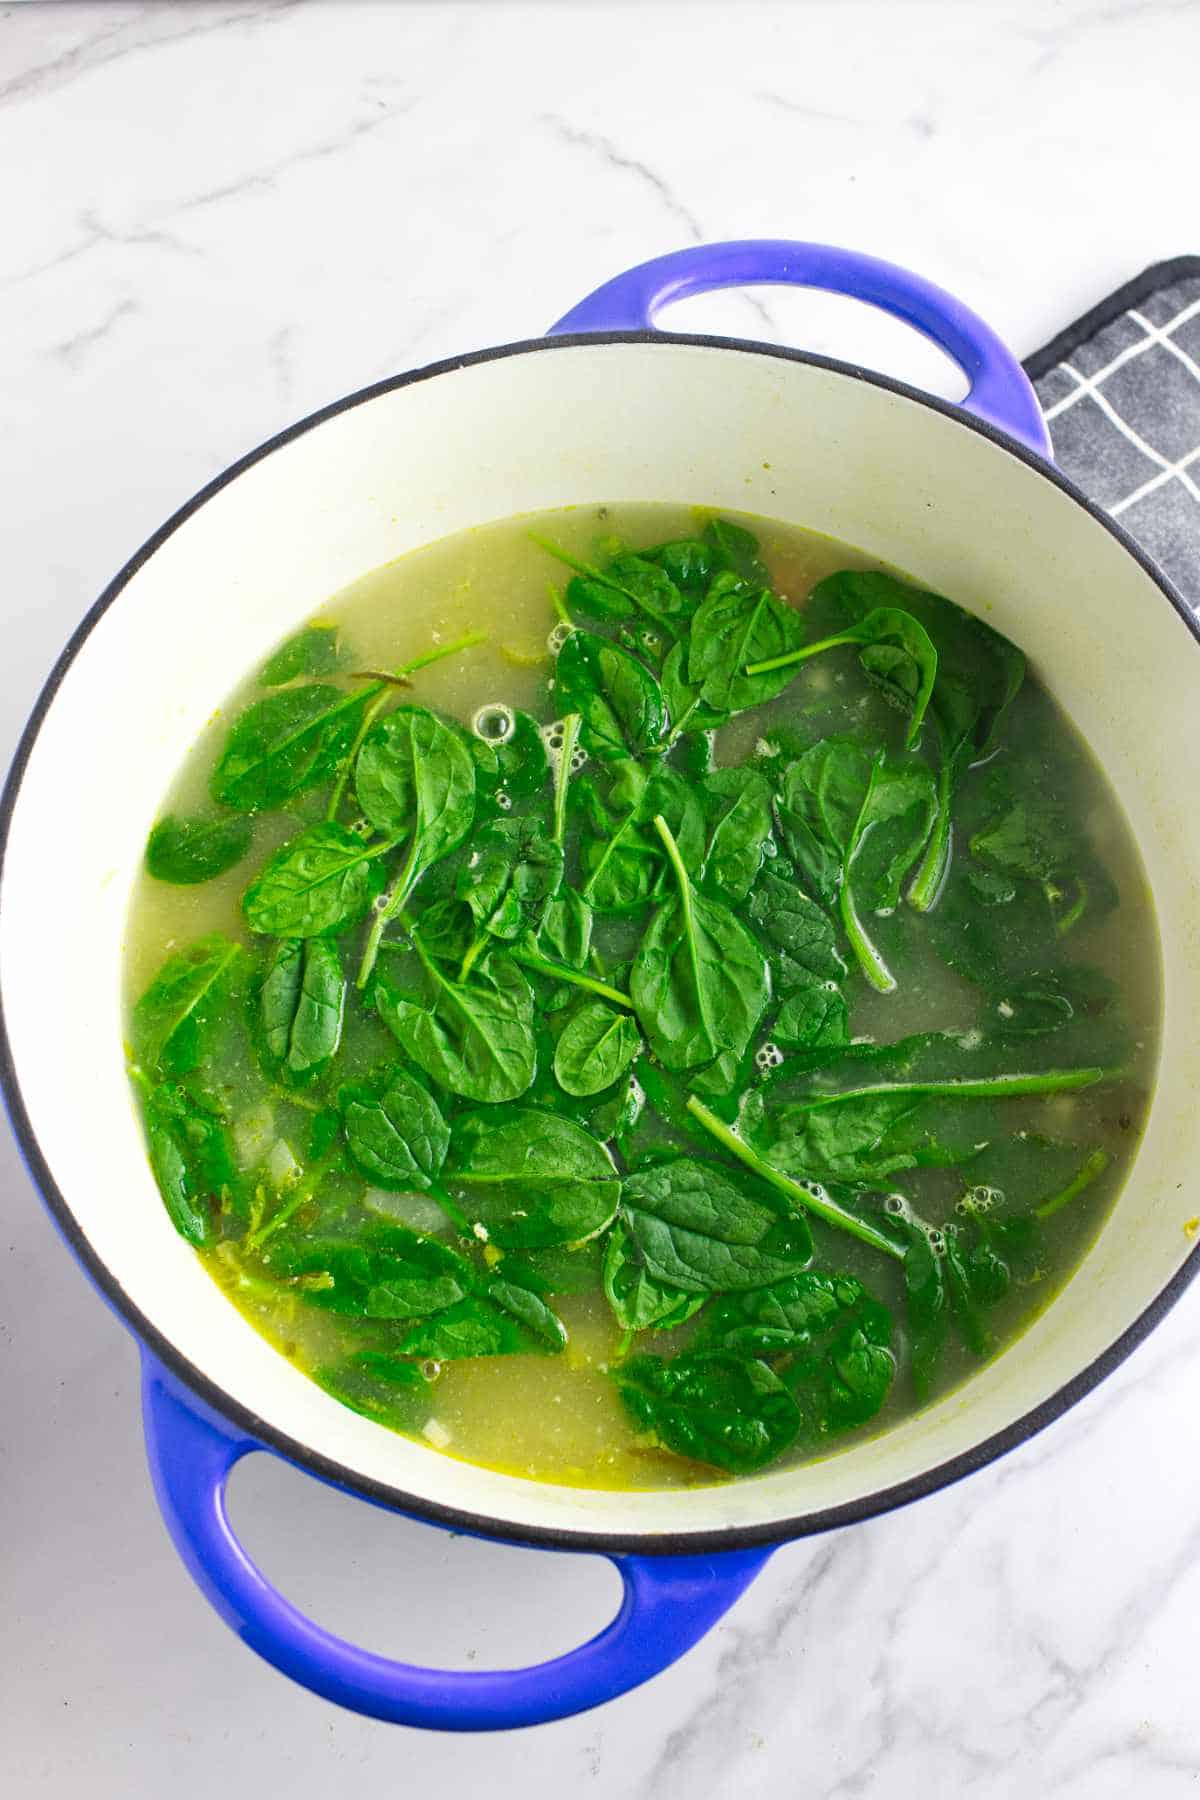 Spinach and orzo added to soup pot.